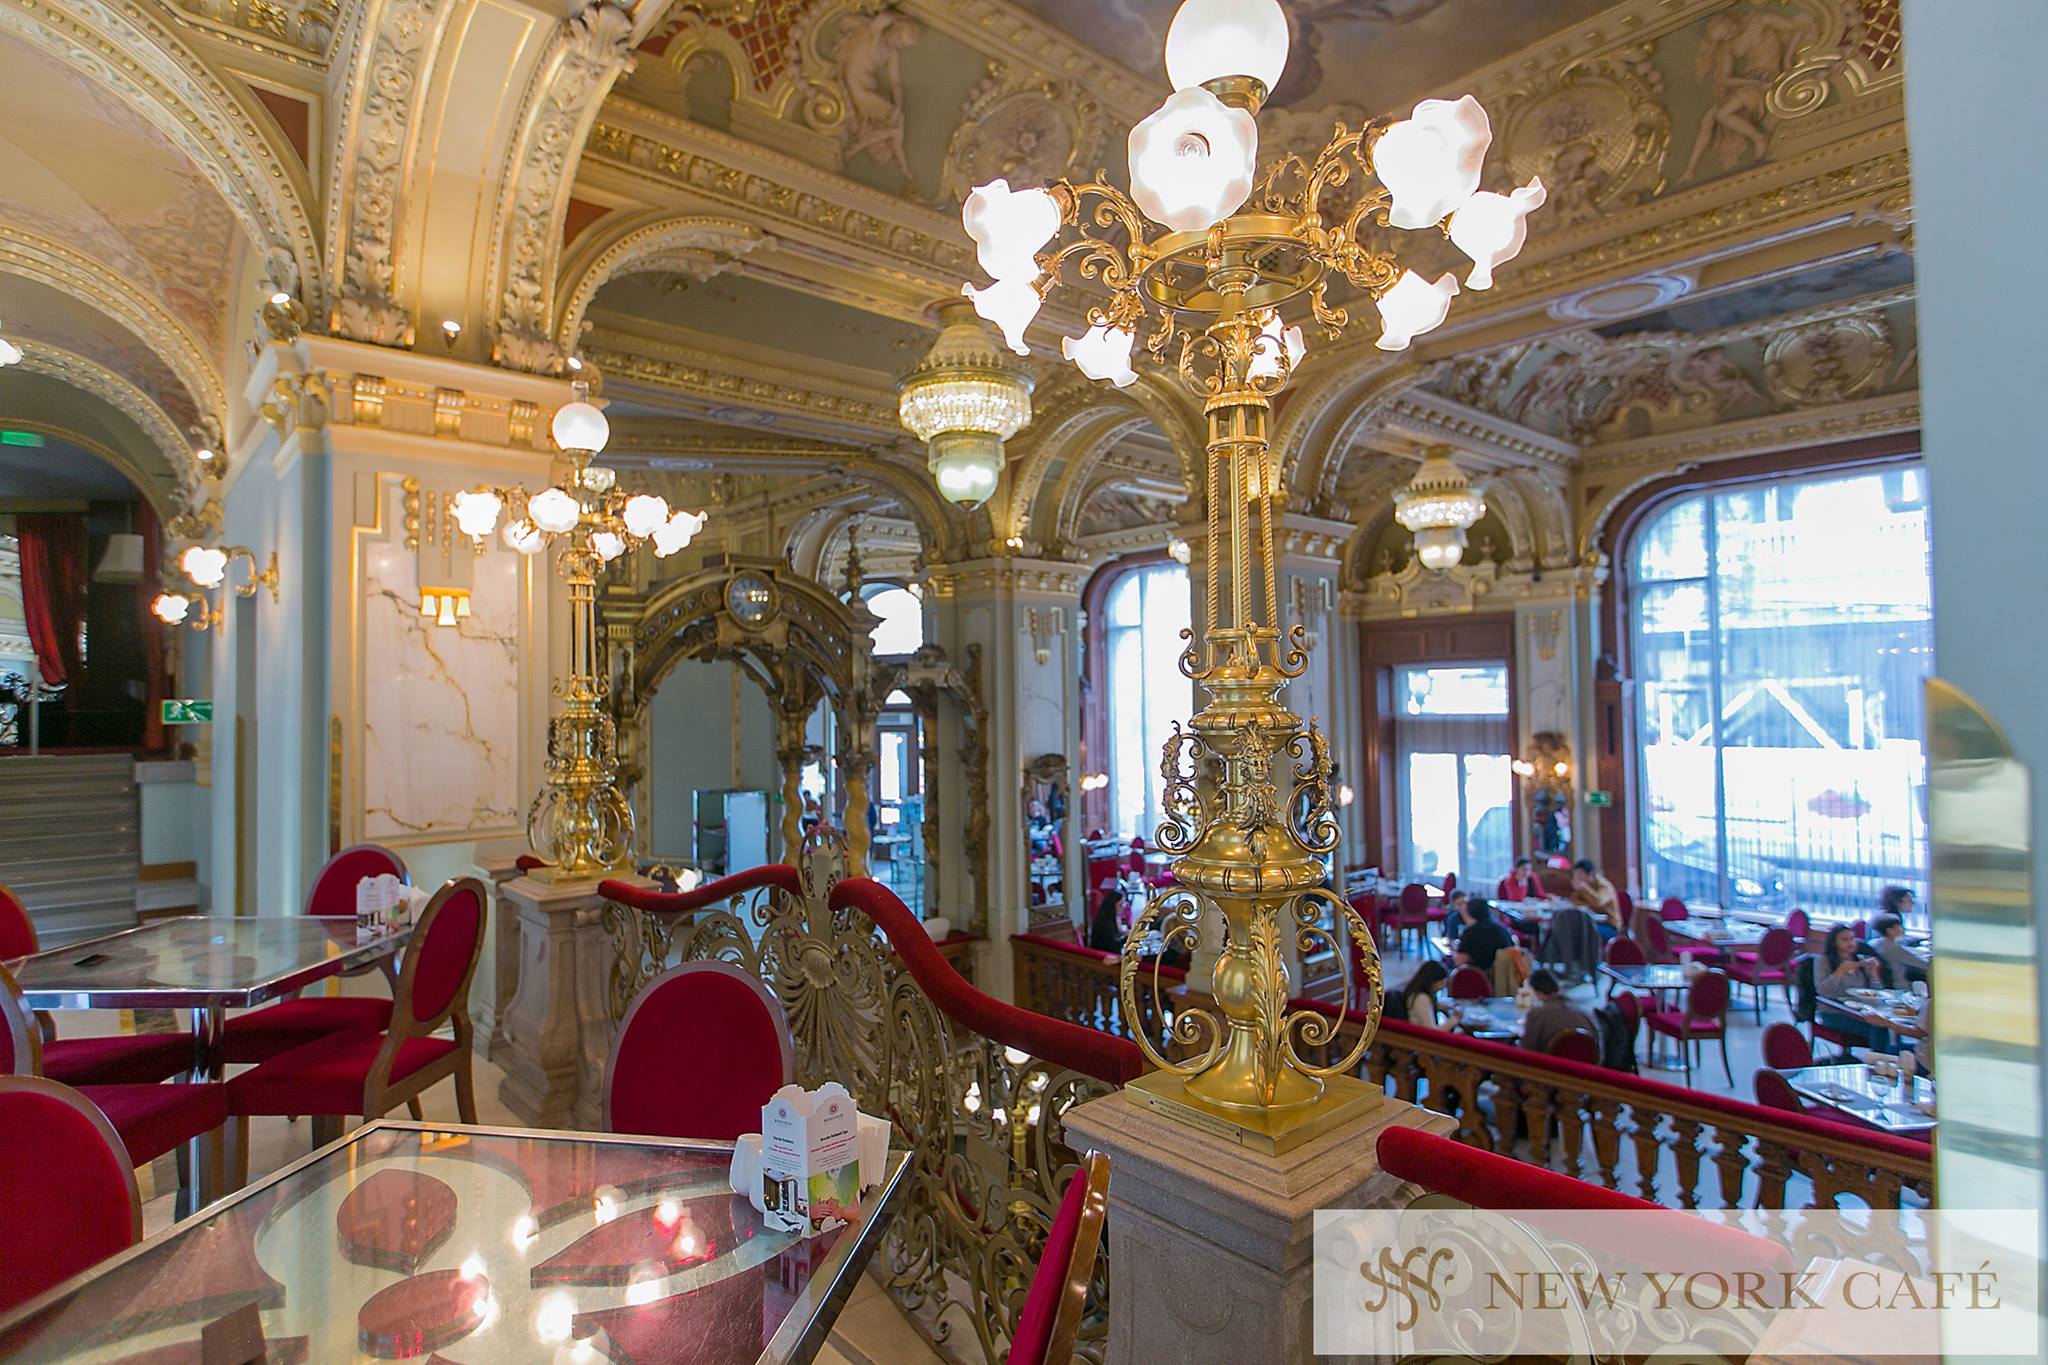 Is Budapest's New York Café - The Most Beautiful Café In The World?